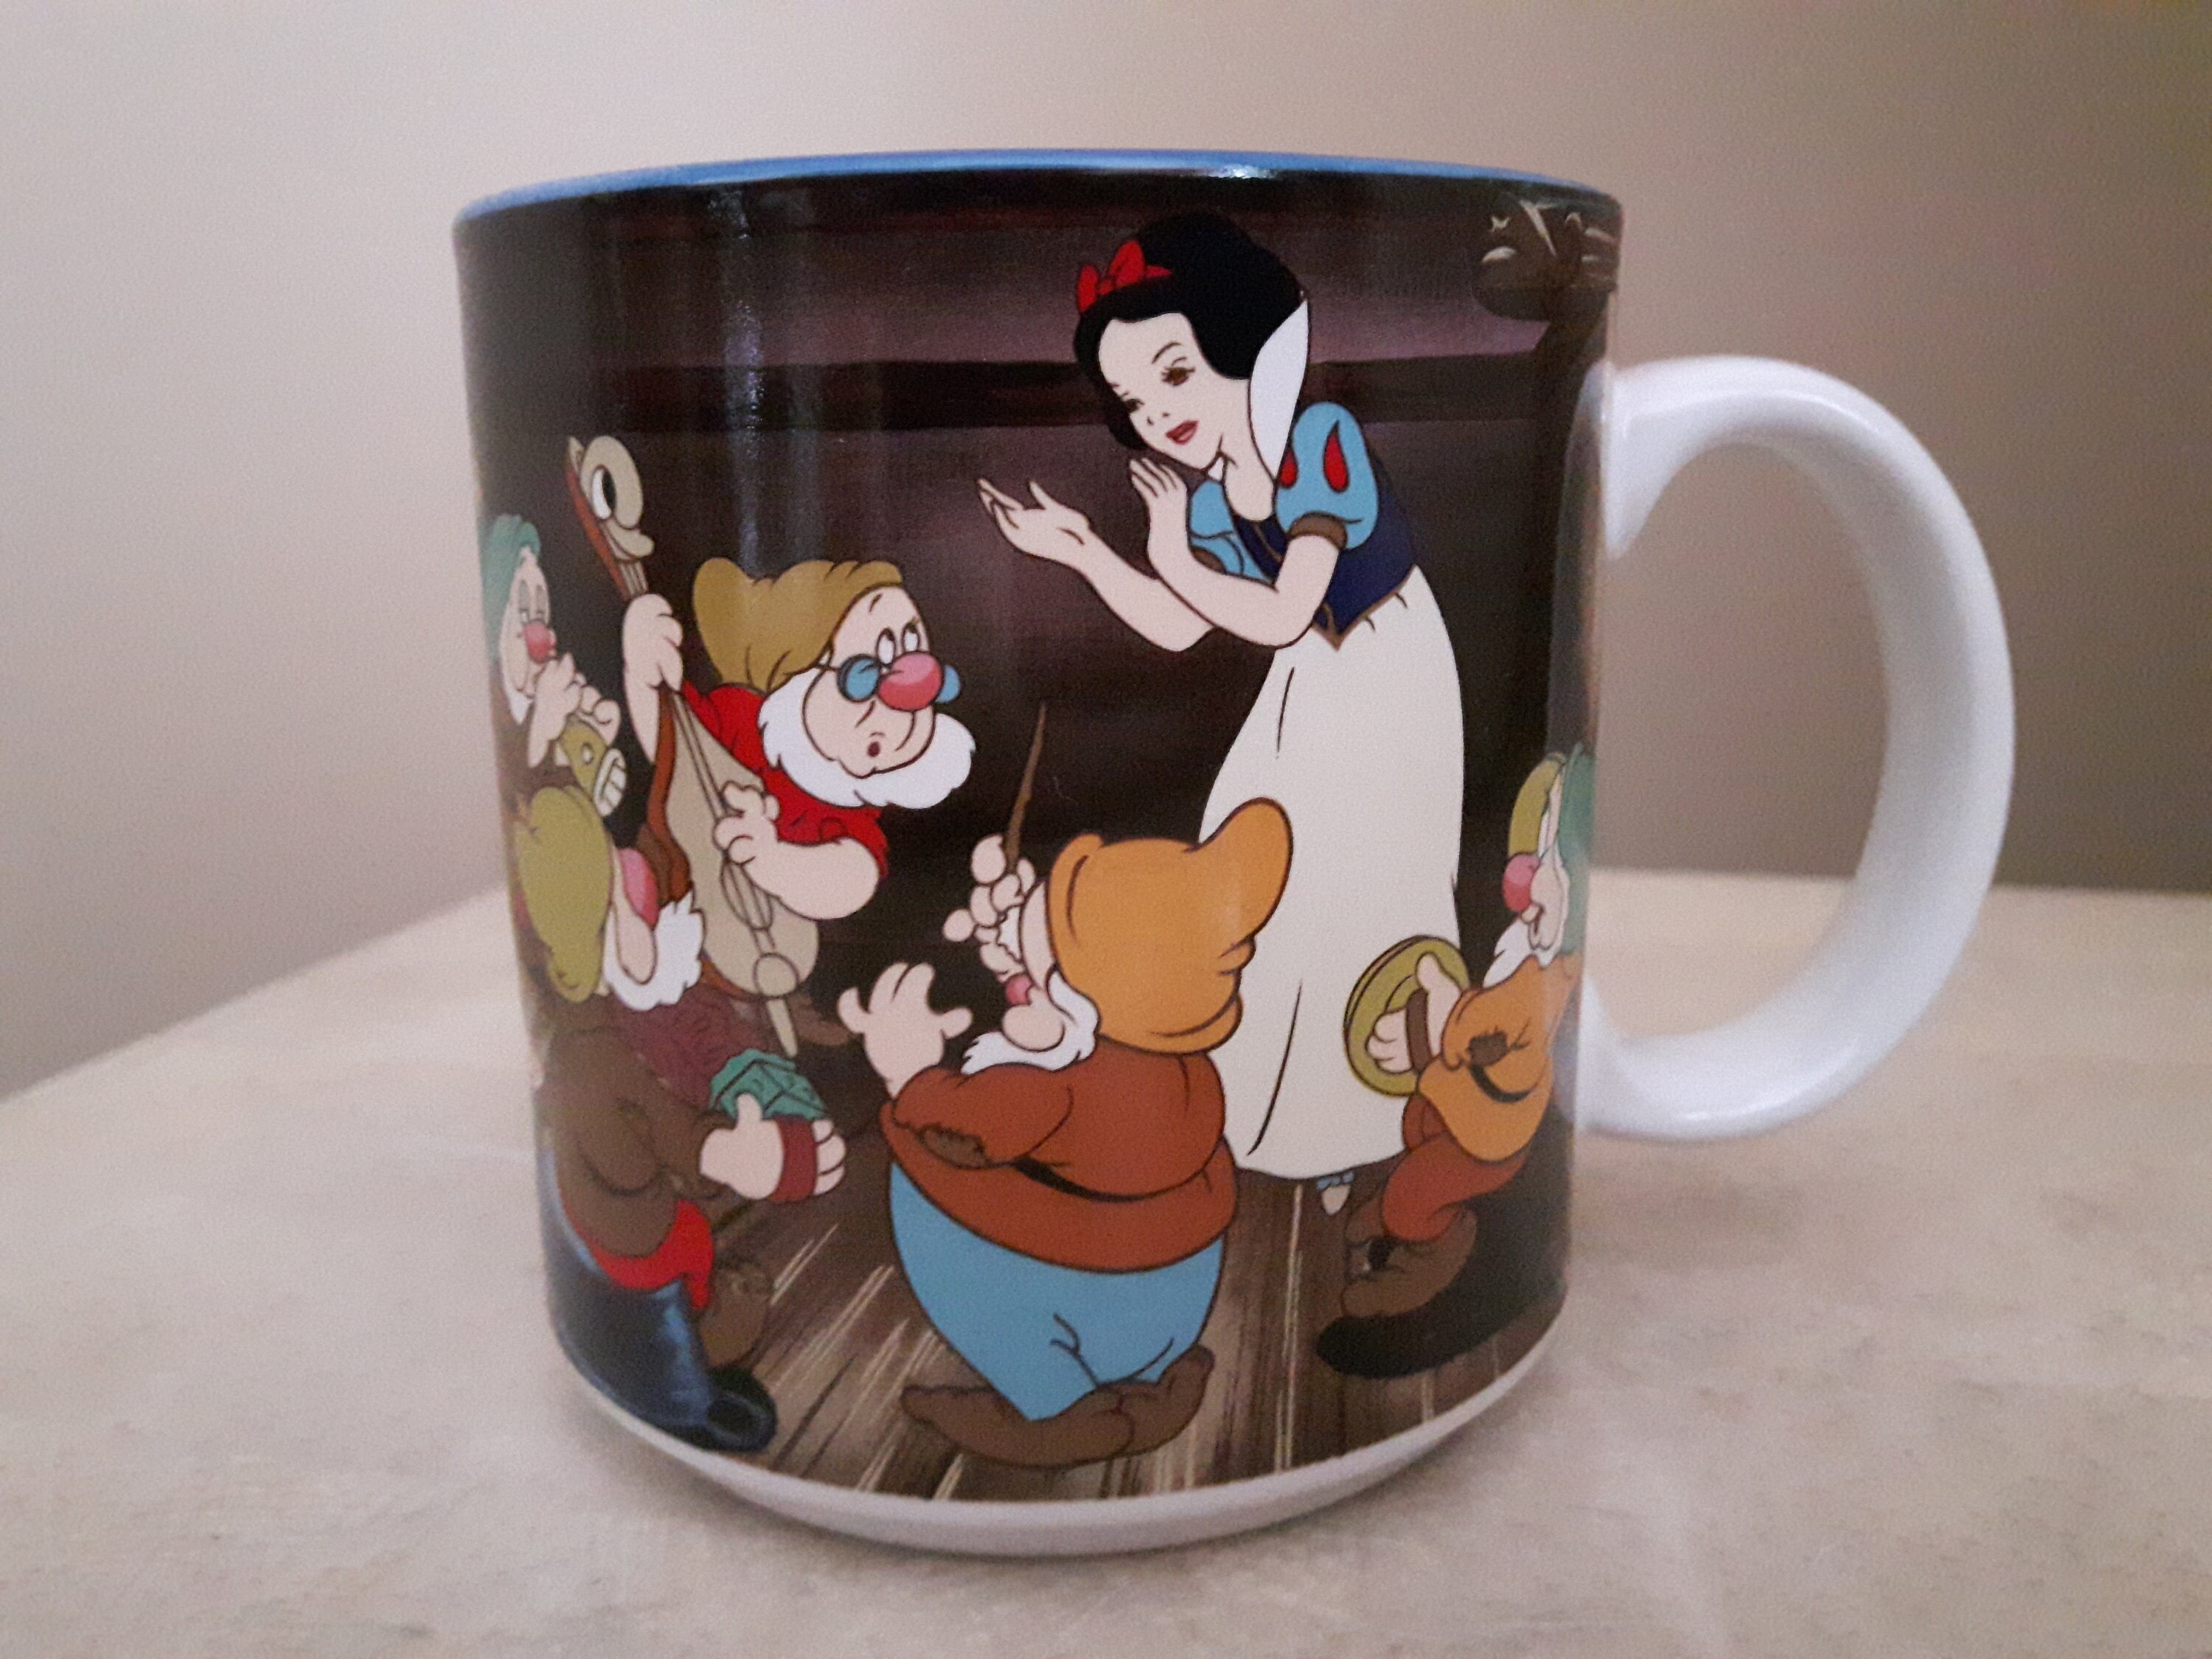 Disney Blanche-Neige et les Sept Nains ( Snow White and the Seven Drawfs )  Simplet ( Dopey ) tasse 380ml